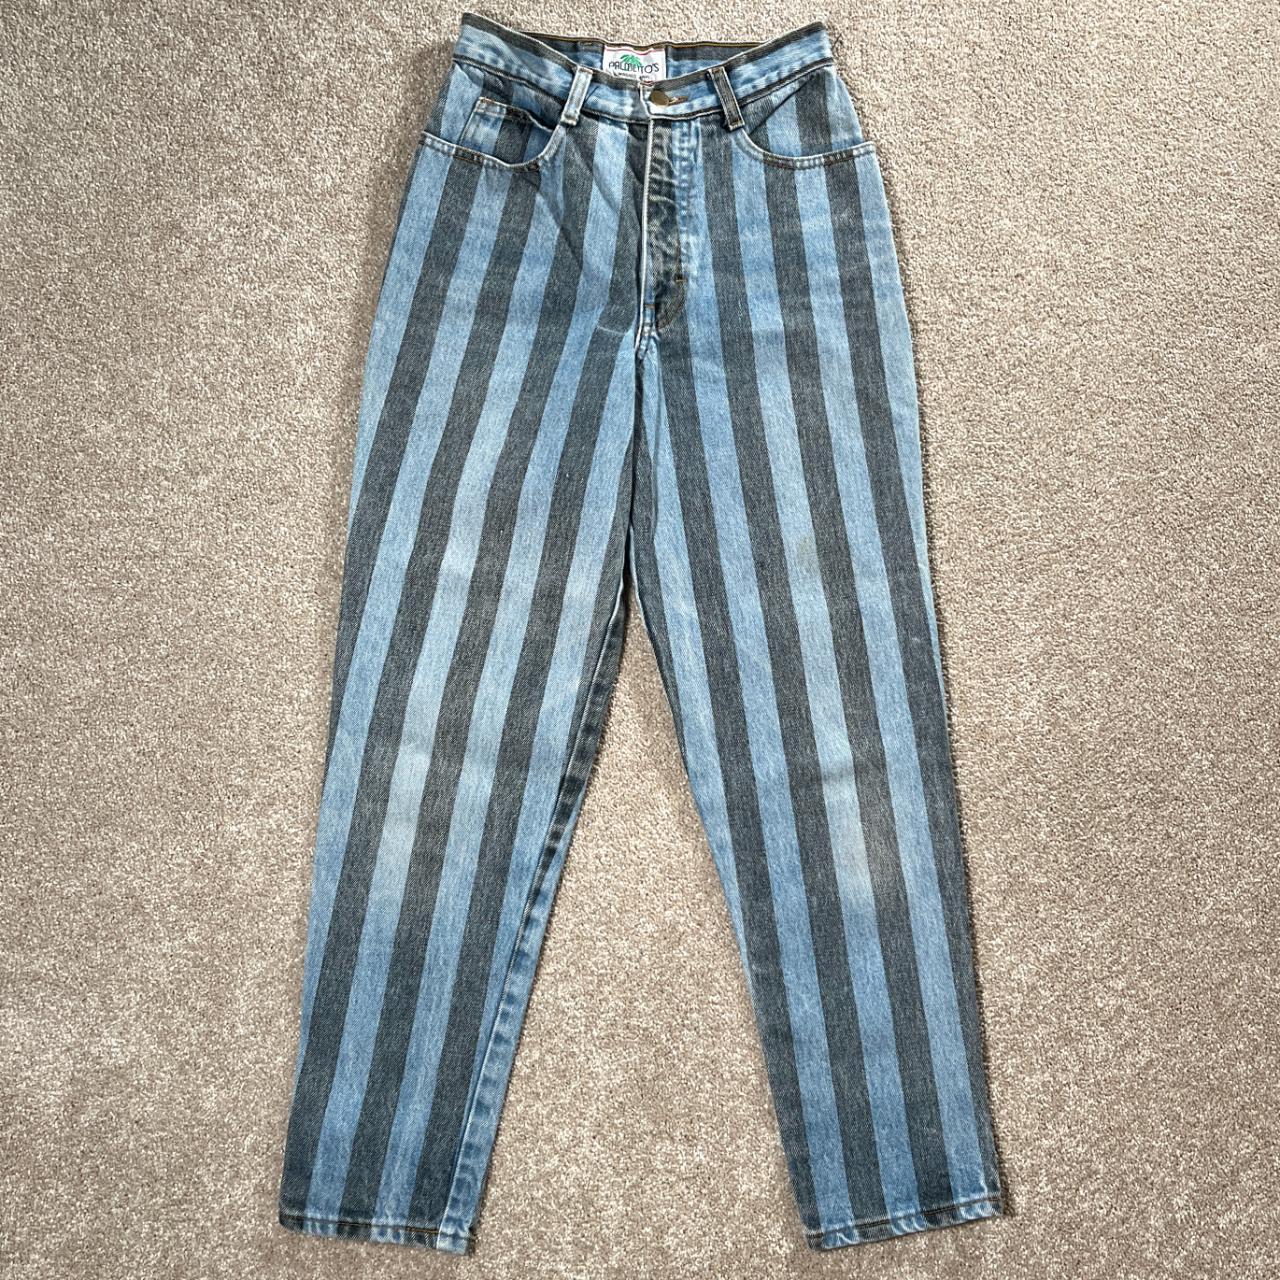 Blue and white striped jeans